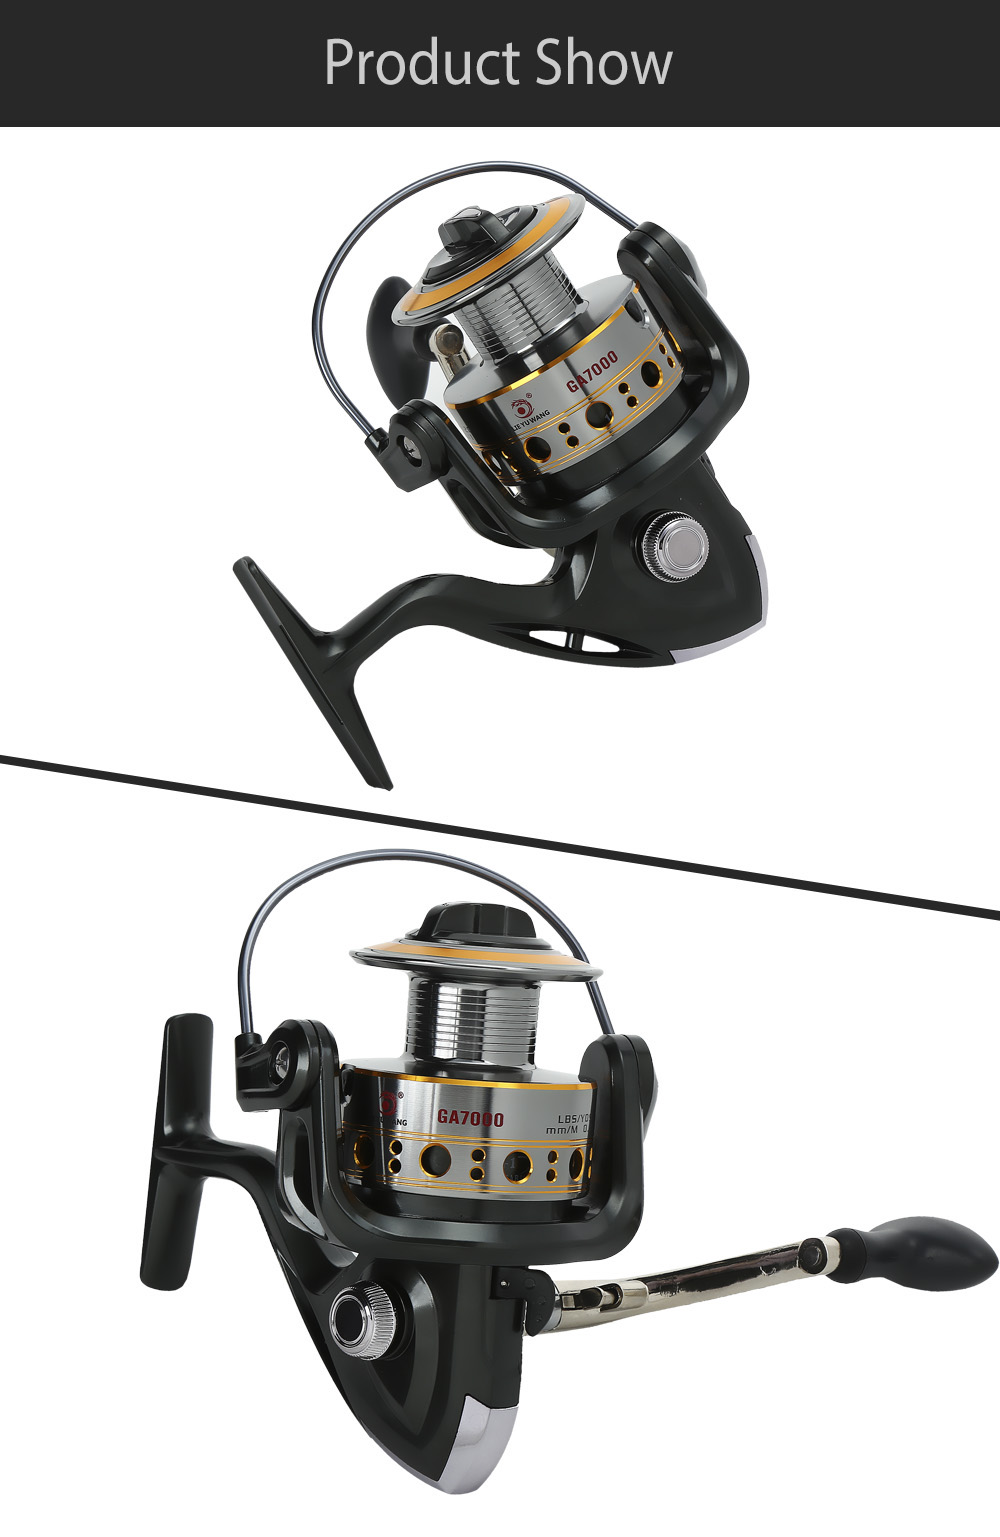 LIEYUWANG 12 + 1BB Full Metal Fishing Spinning Reel with Exchangeable Handle